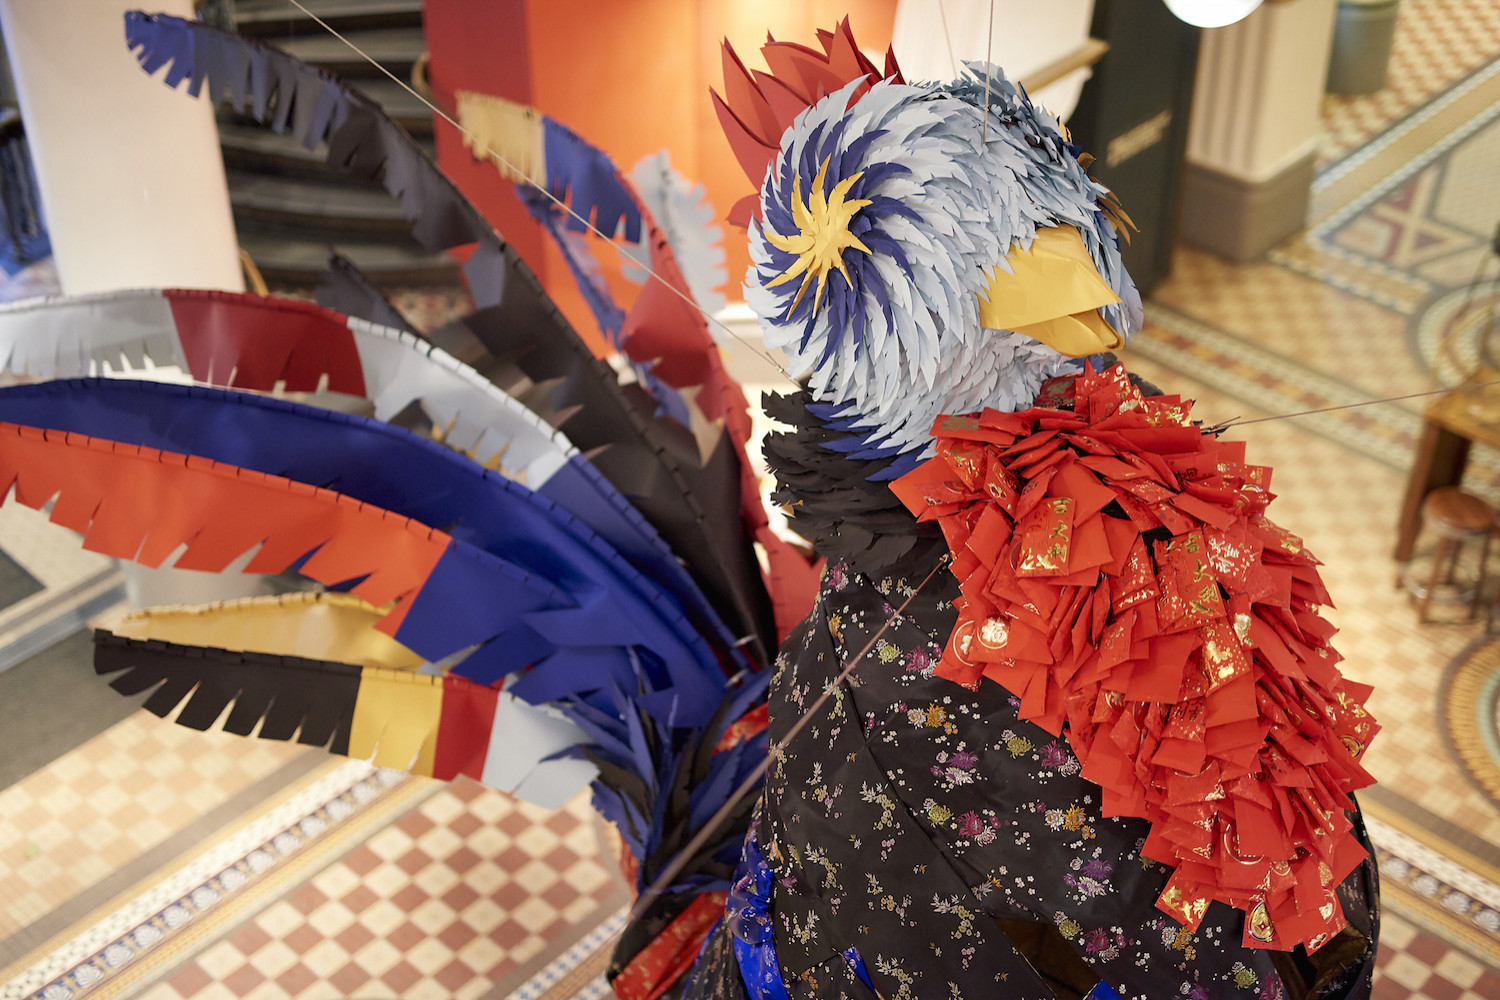 The Rooster by Carey Taylor, Jeff McCann and Reso & Co at QVB, Sydney. Photo by Elyssa Syskes Smith